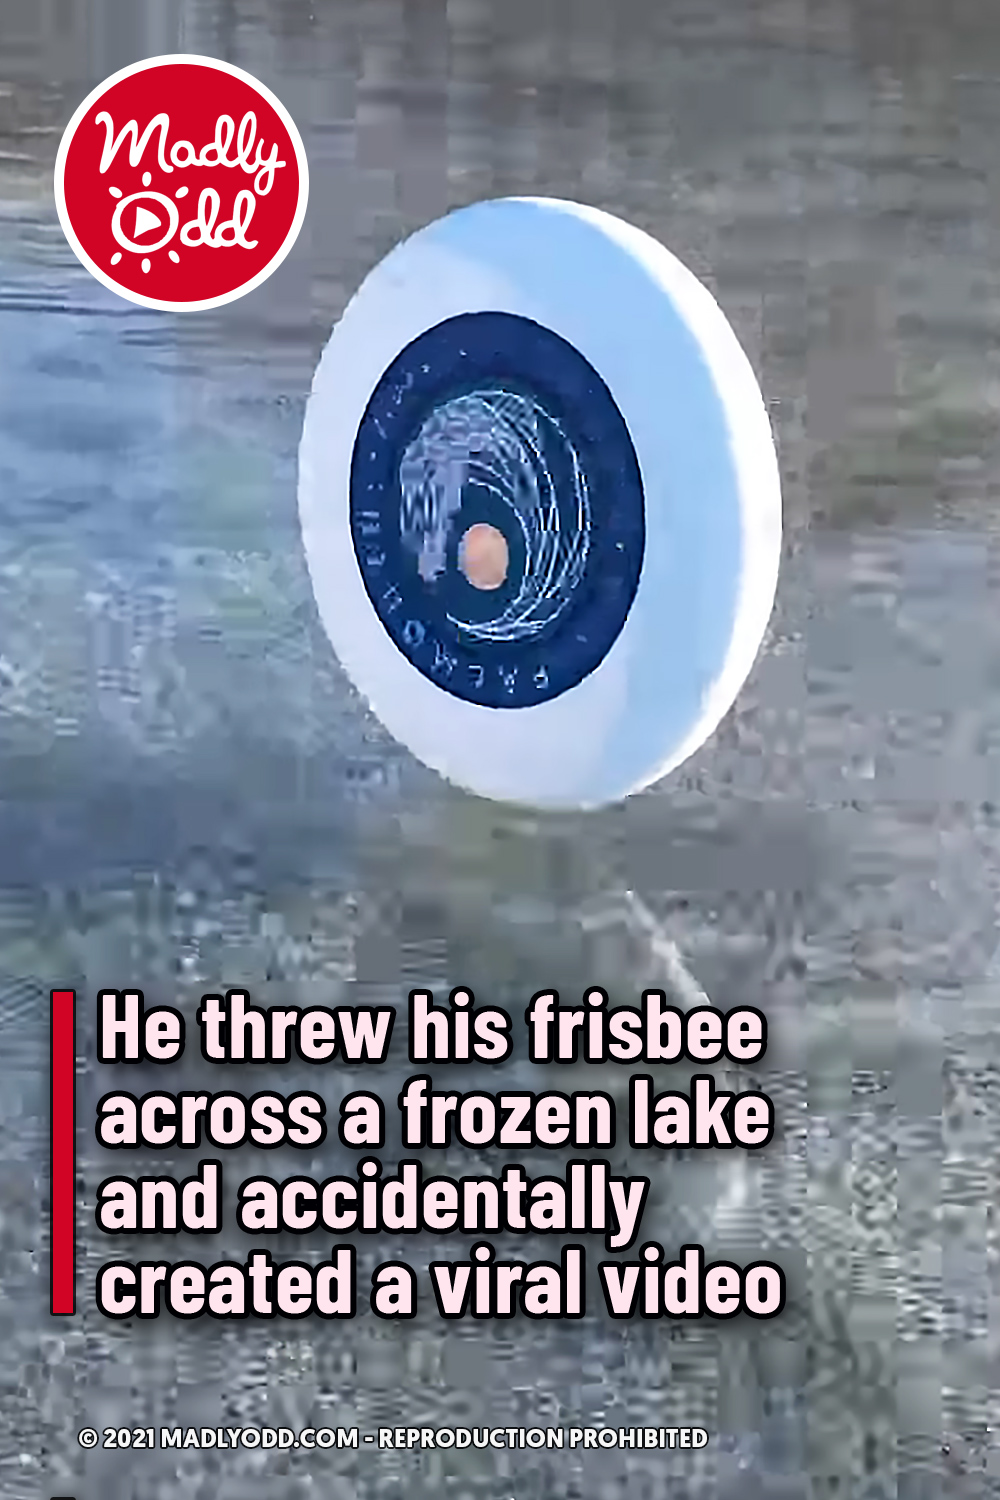 He threw his frisbee across a frozen lake and accidentally created a viral video